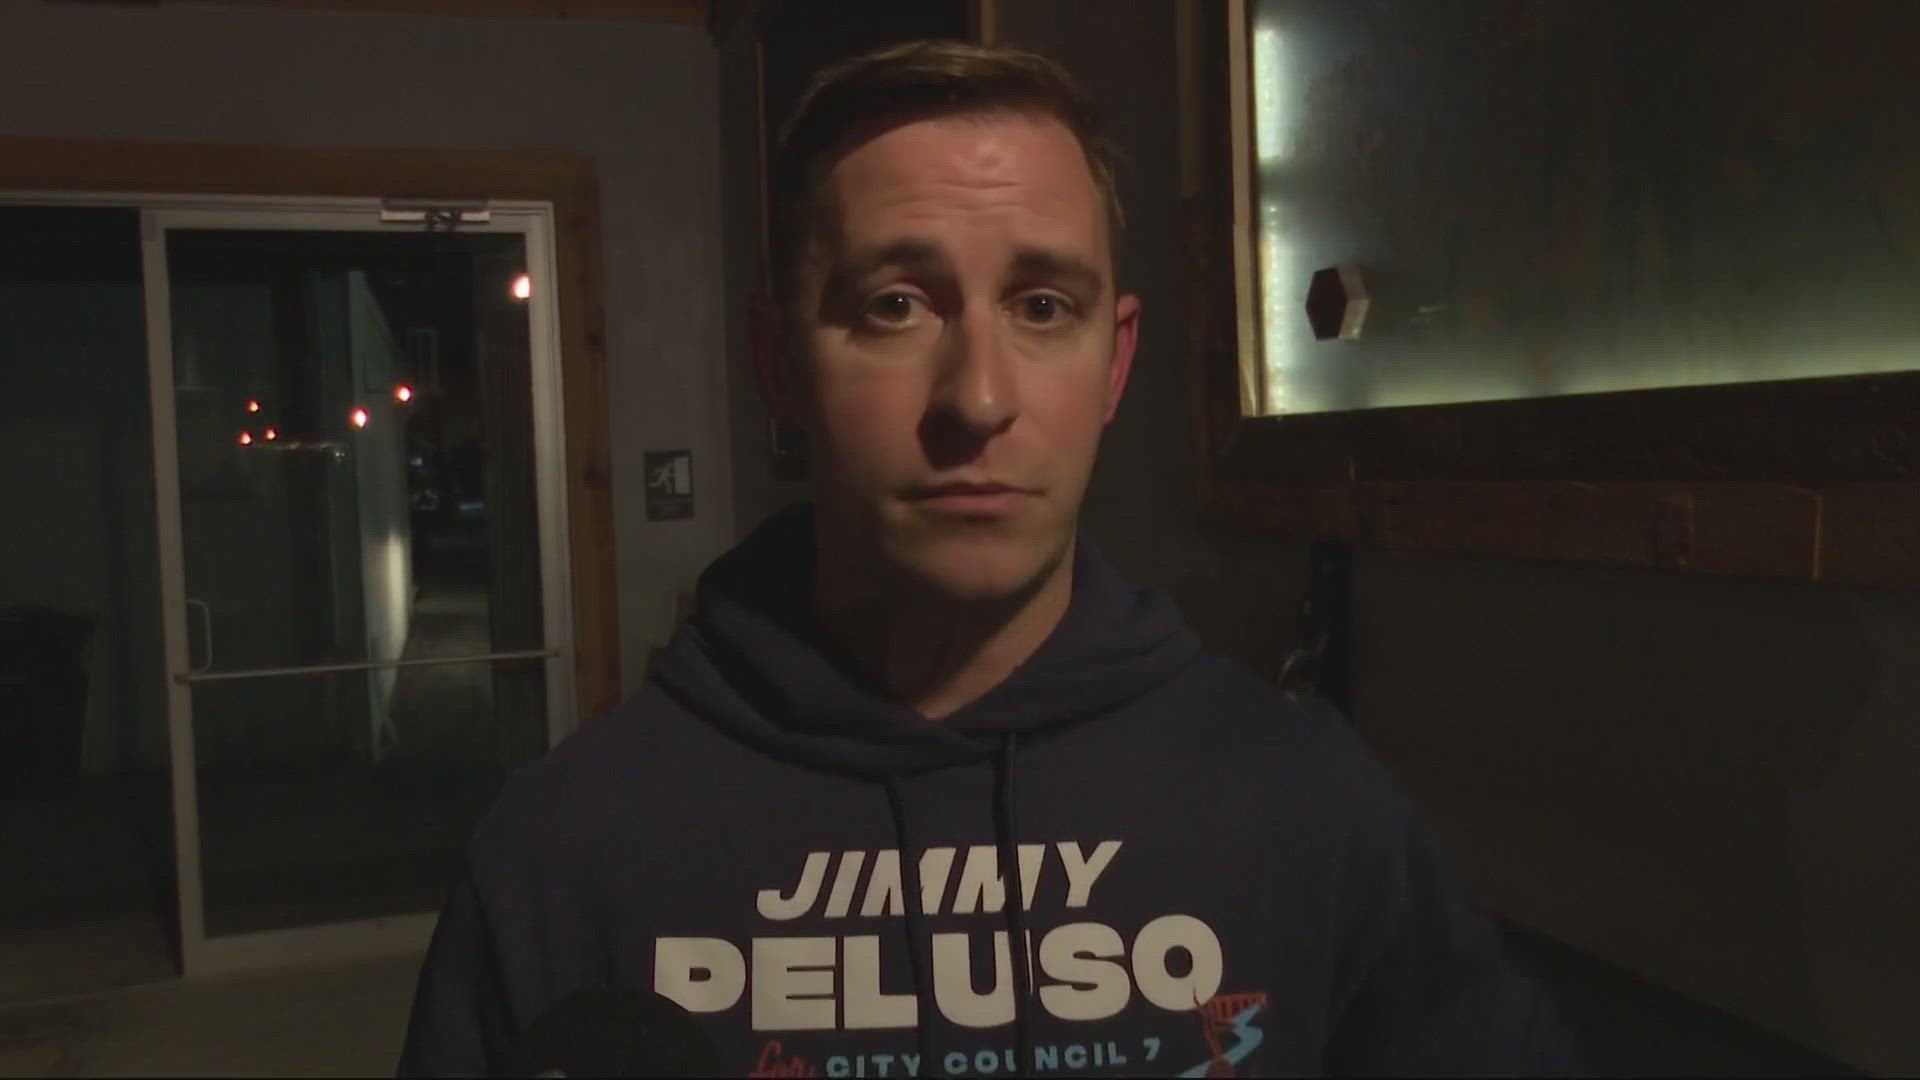 Republican Joseph Hogan and Democrat Jimmy Peluso advance to the May election.